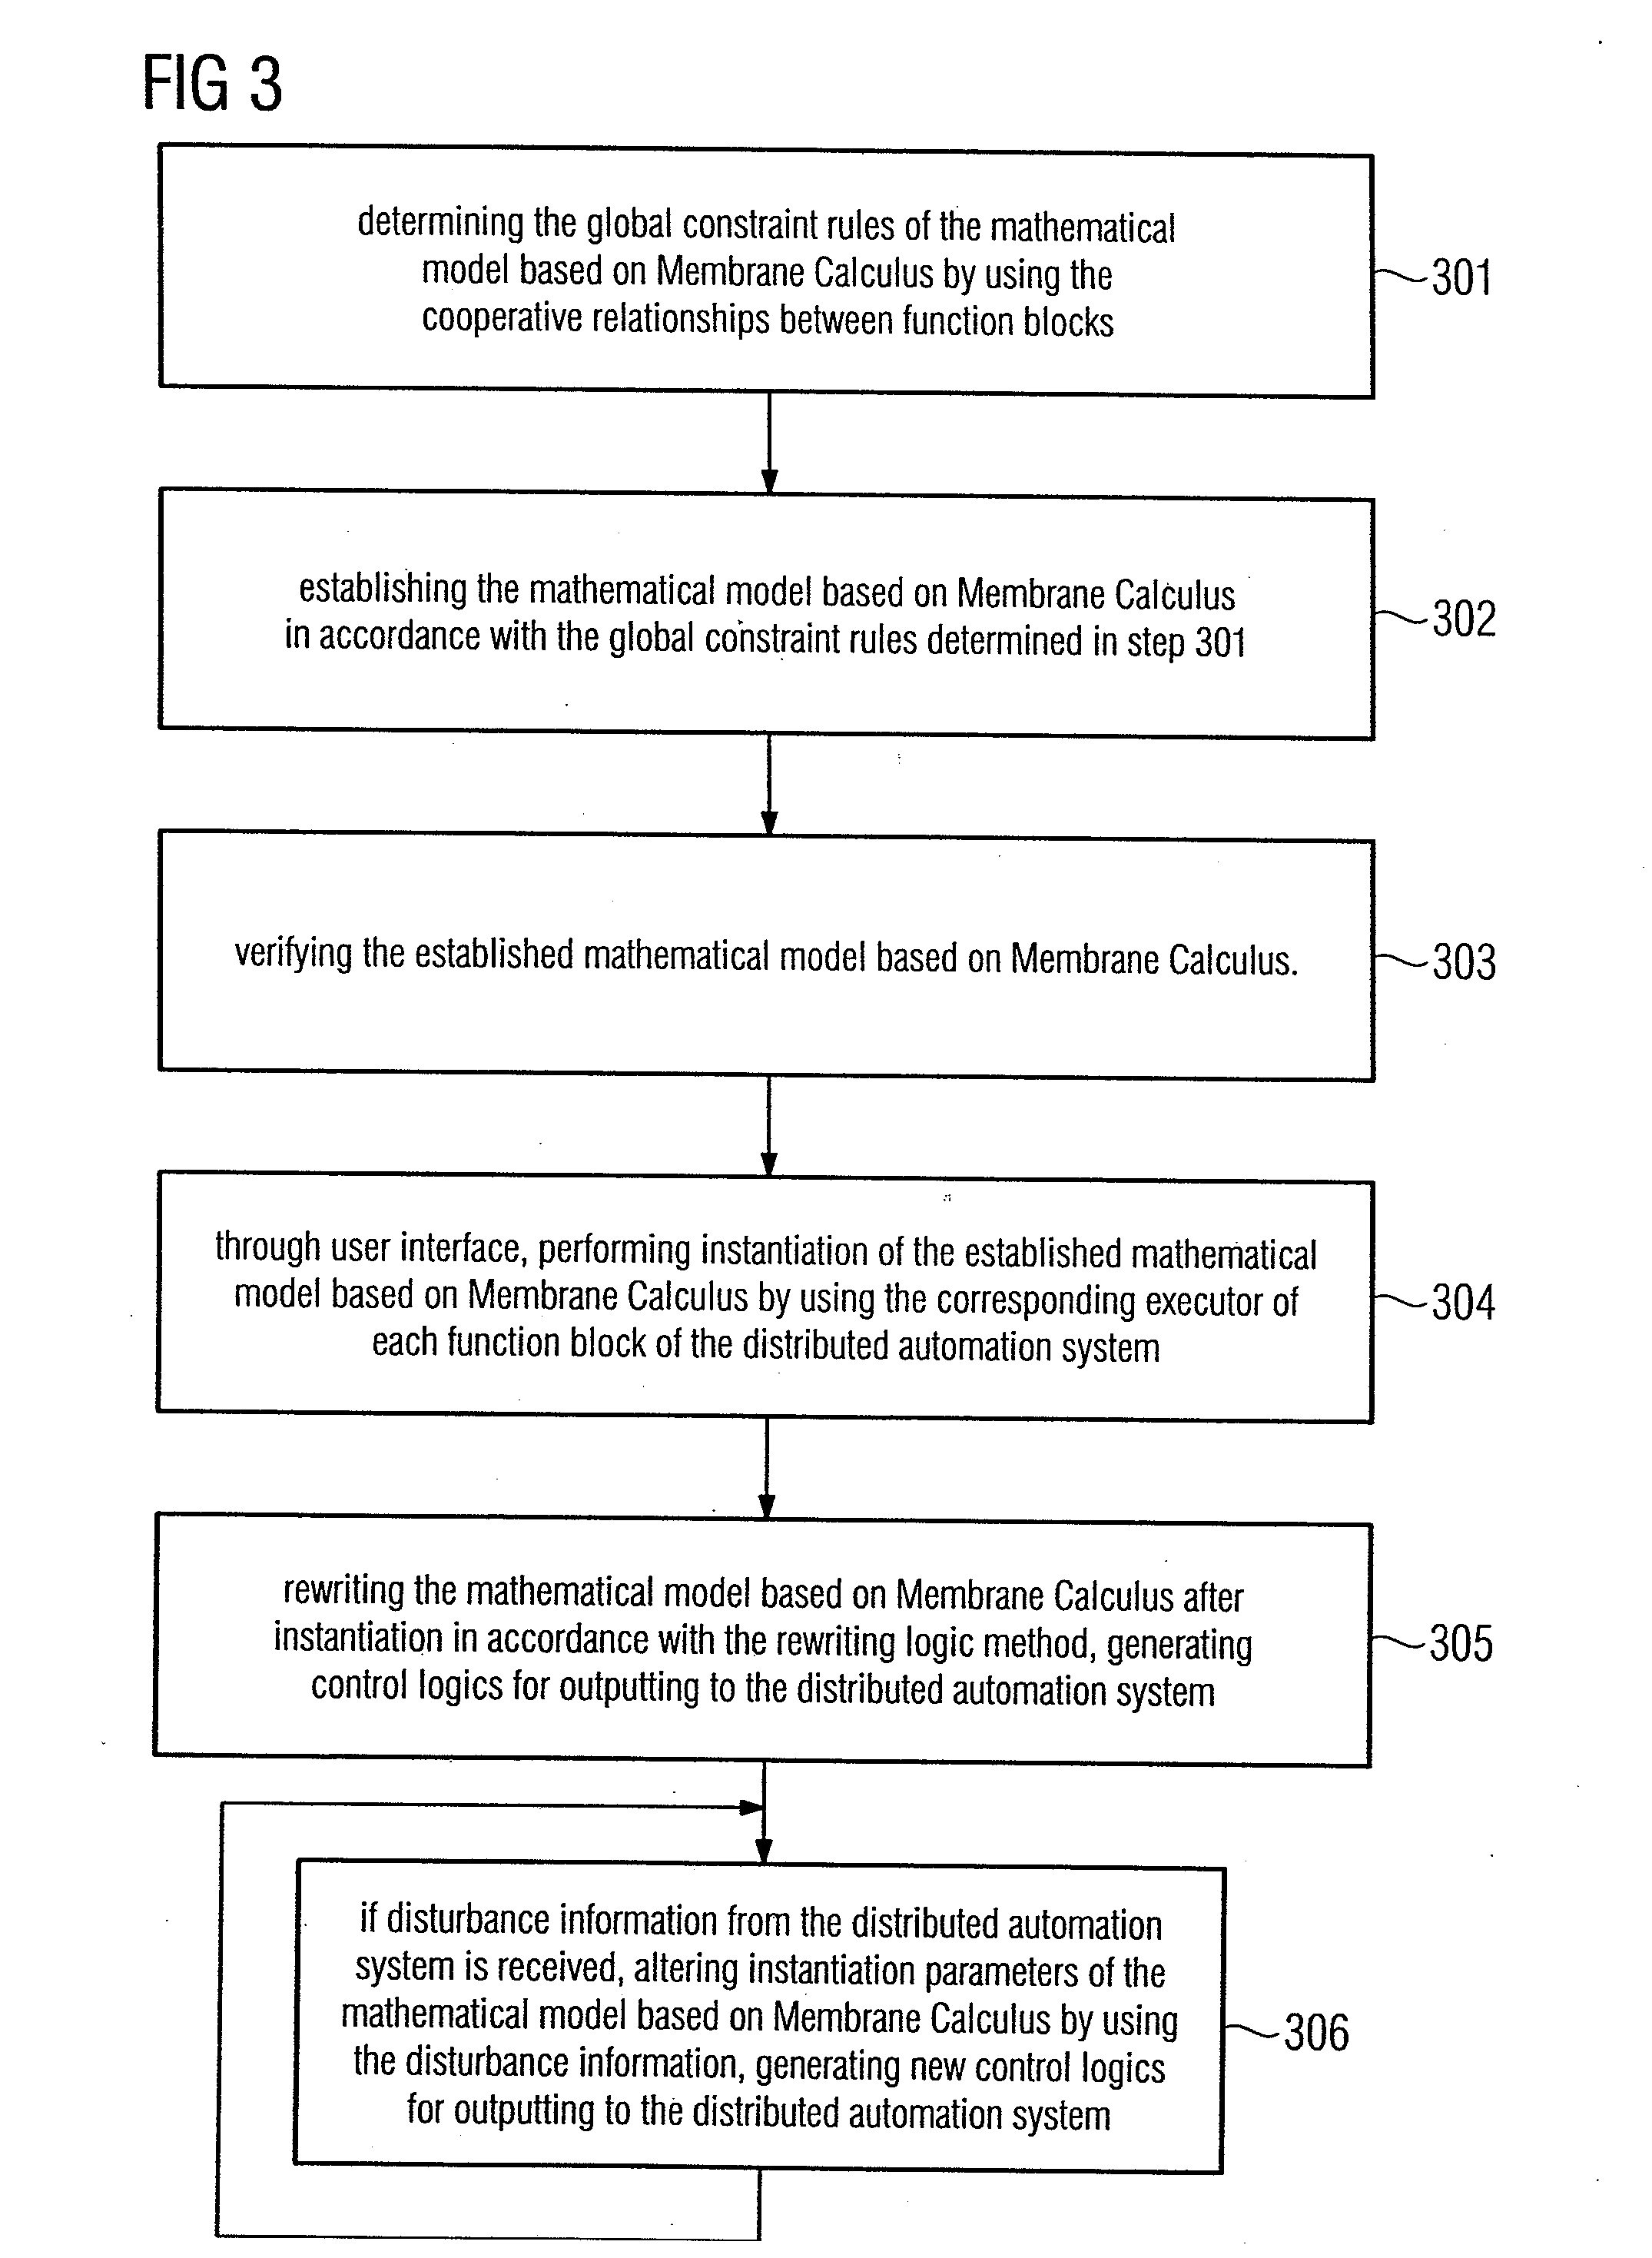 Method and Apparatus for Controlling a Distributed Automation System